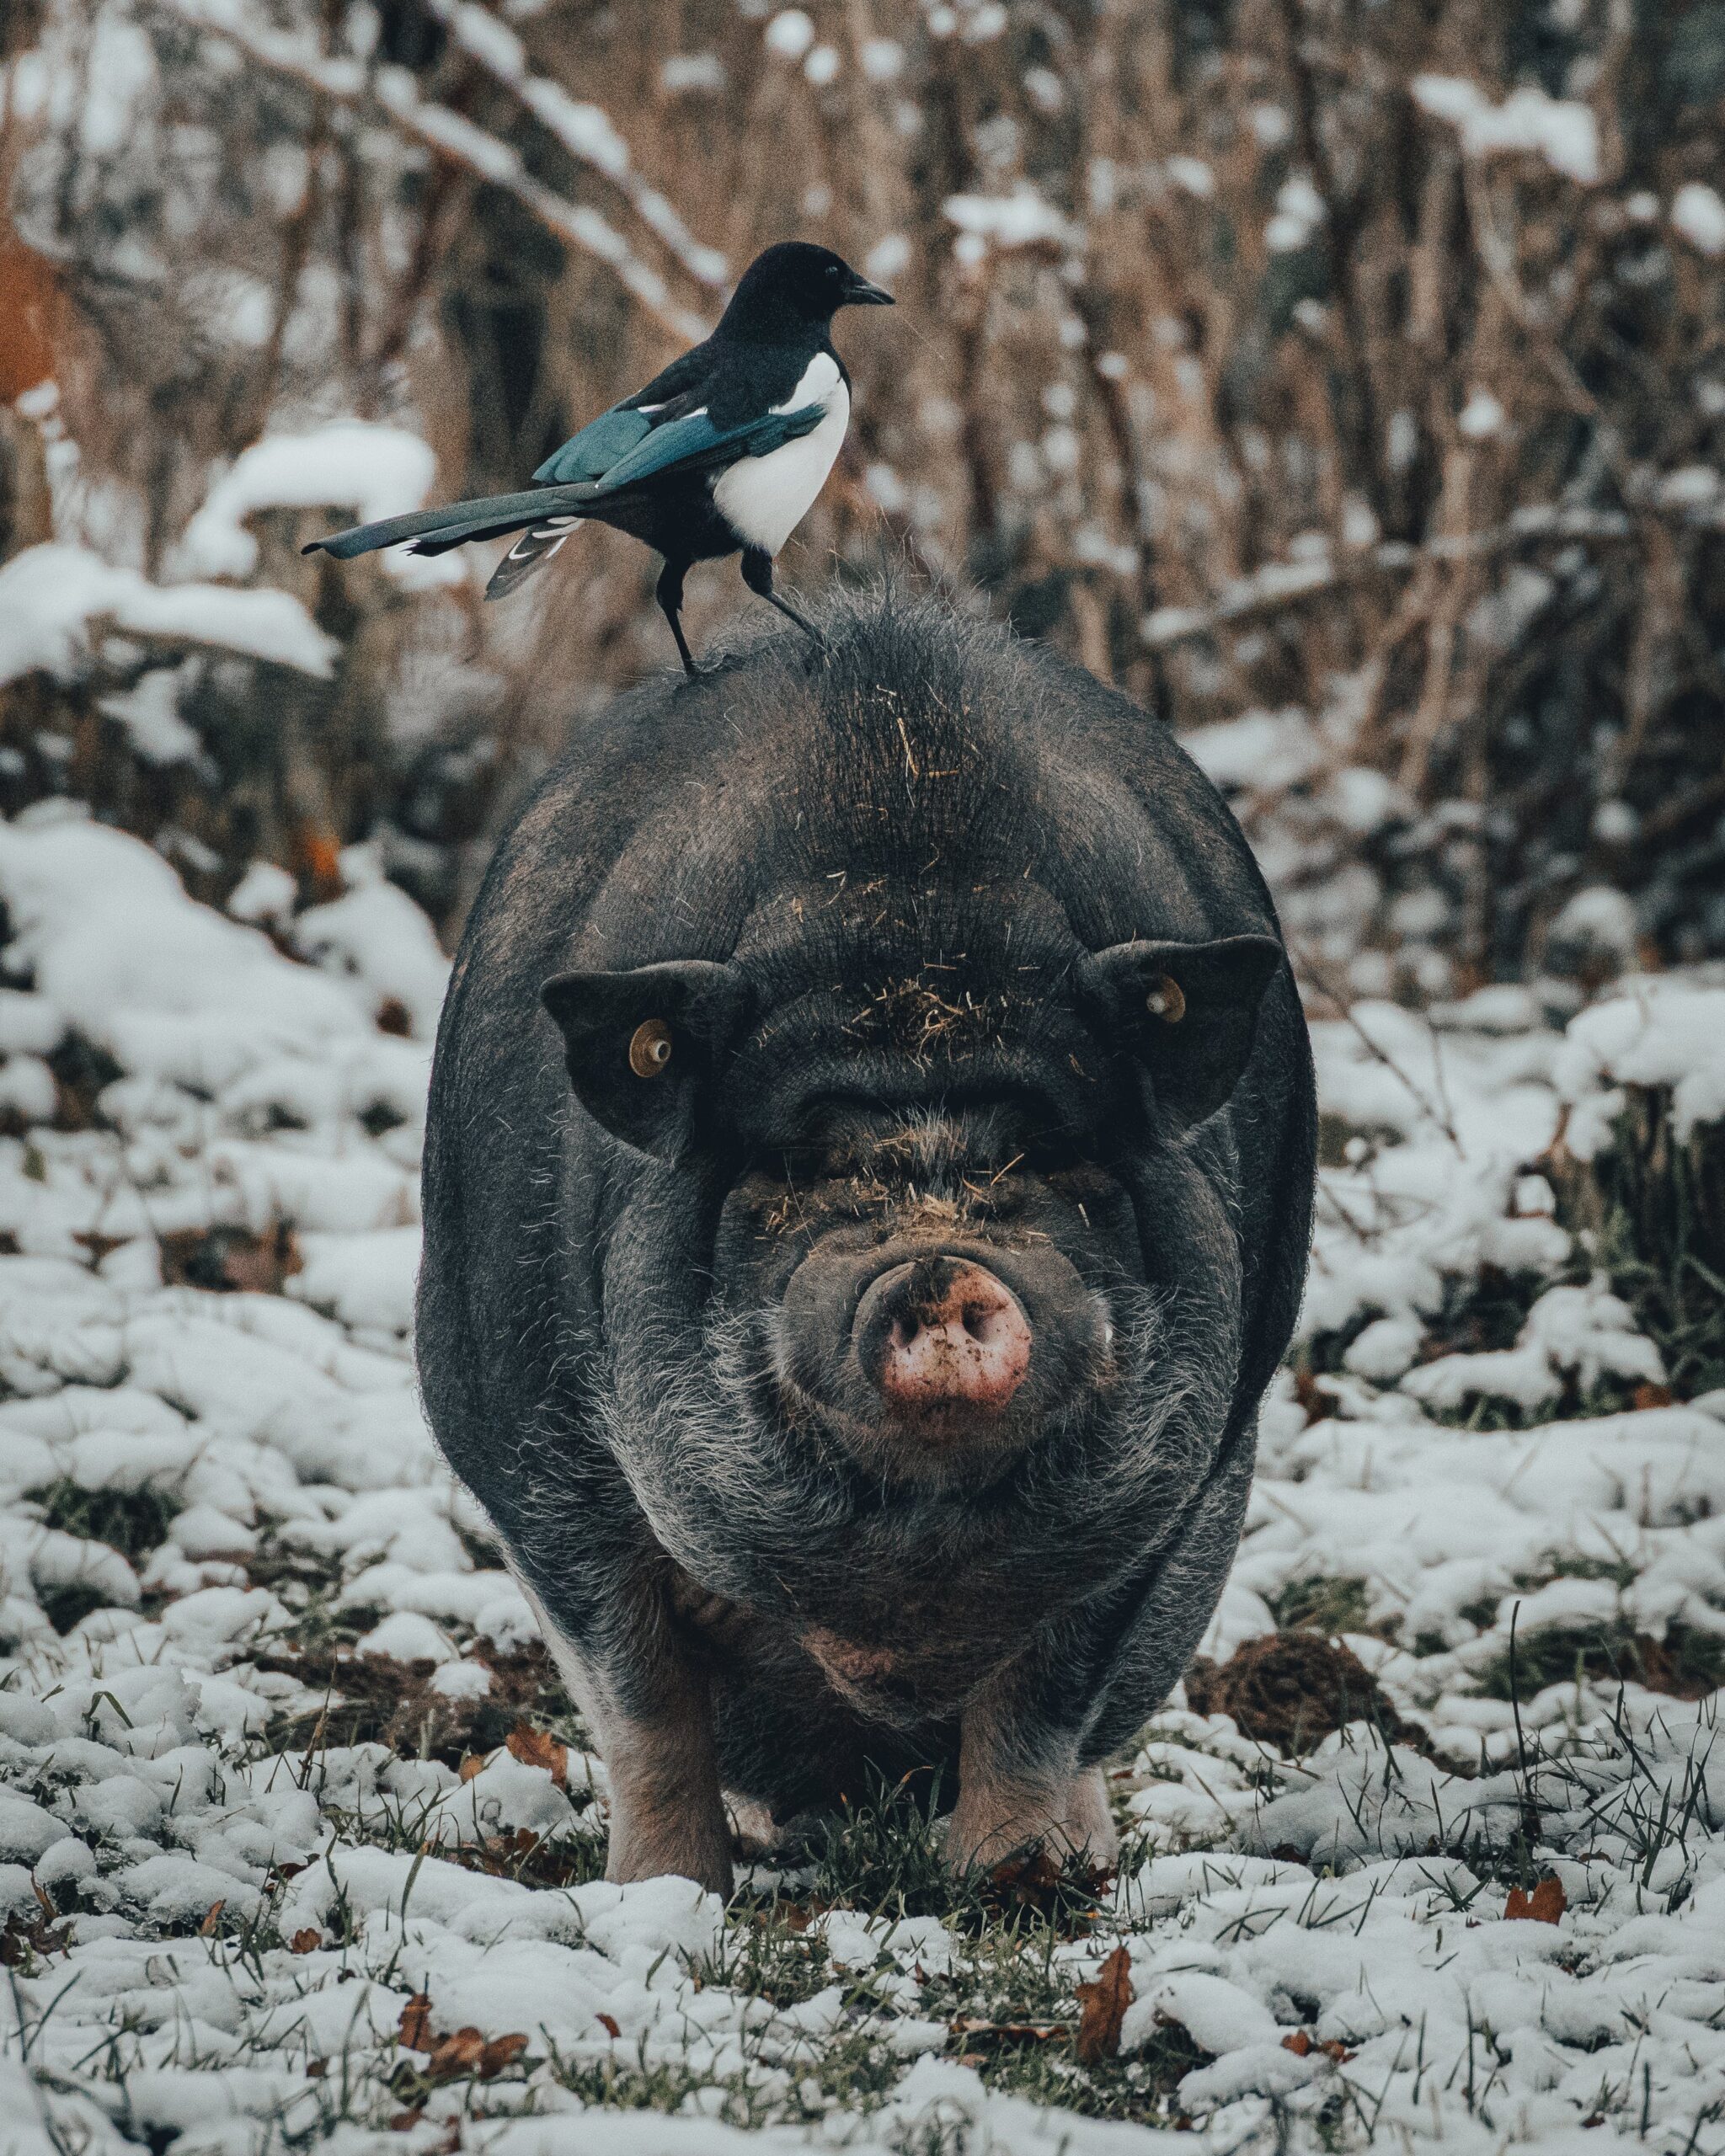 In a snowy woodland, a common magpie perches atop a black pig as it walks towards the camera.